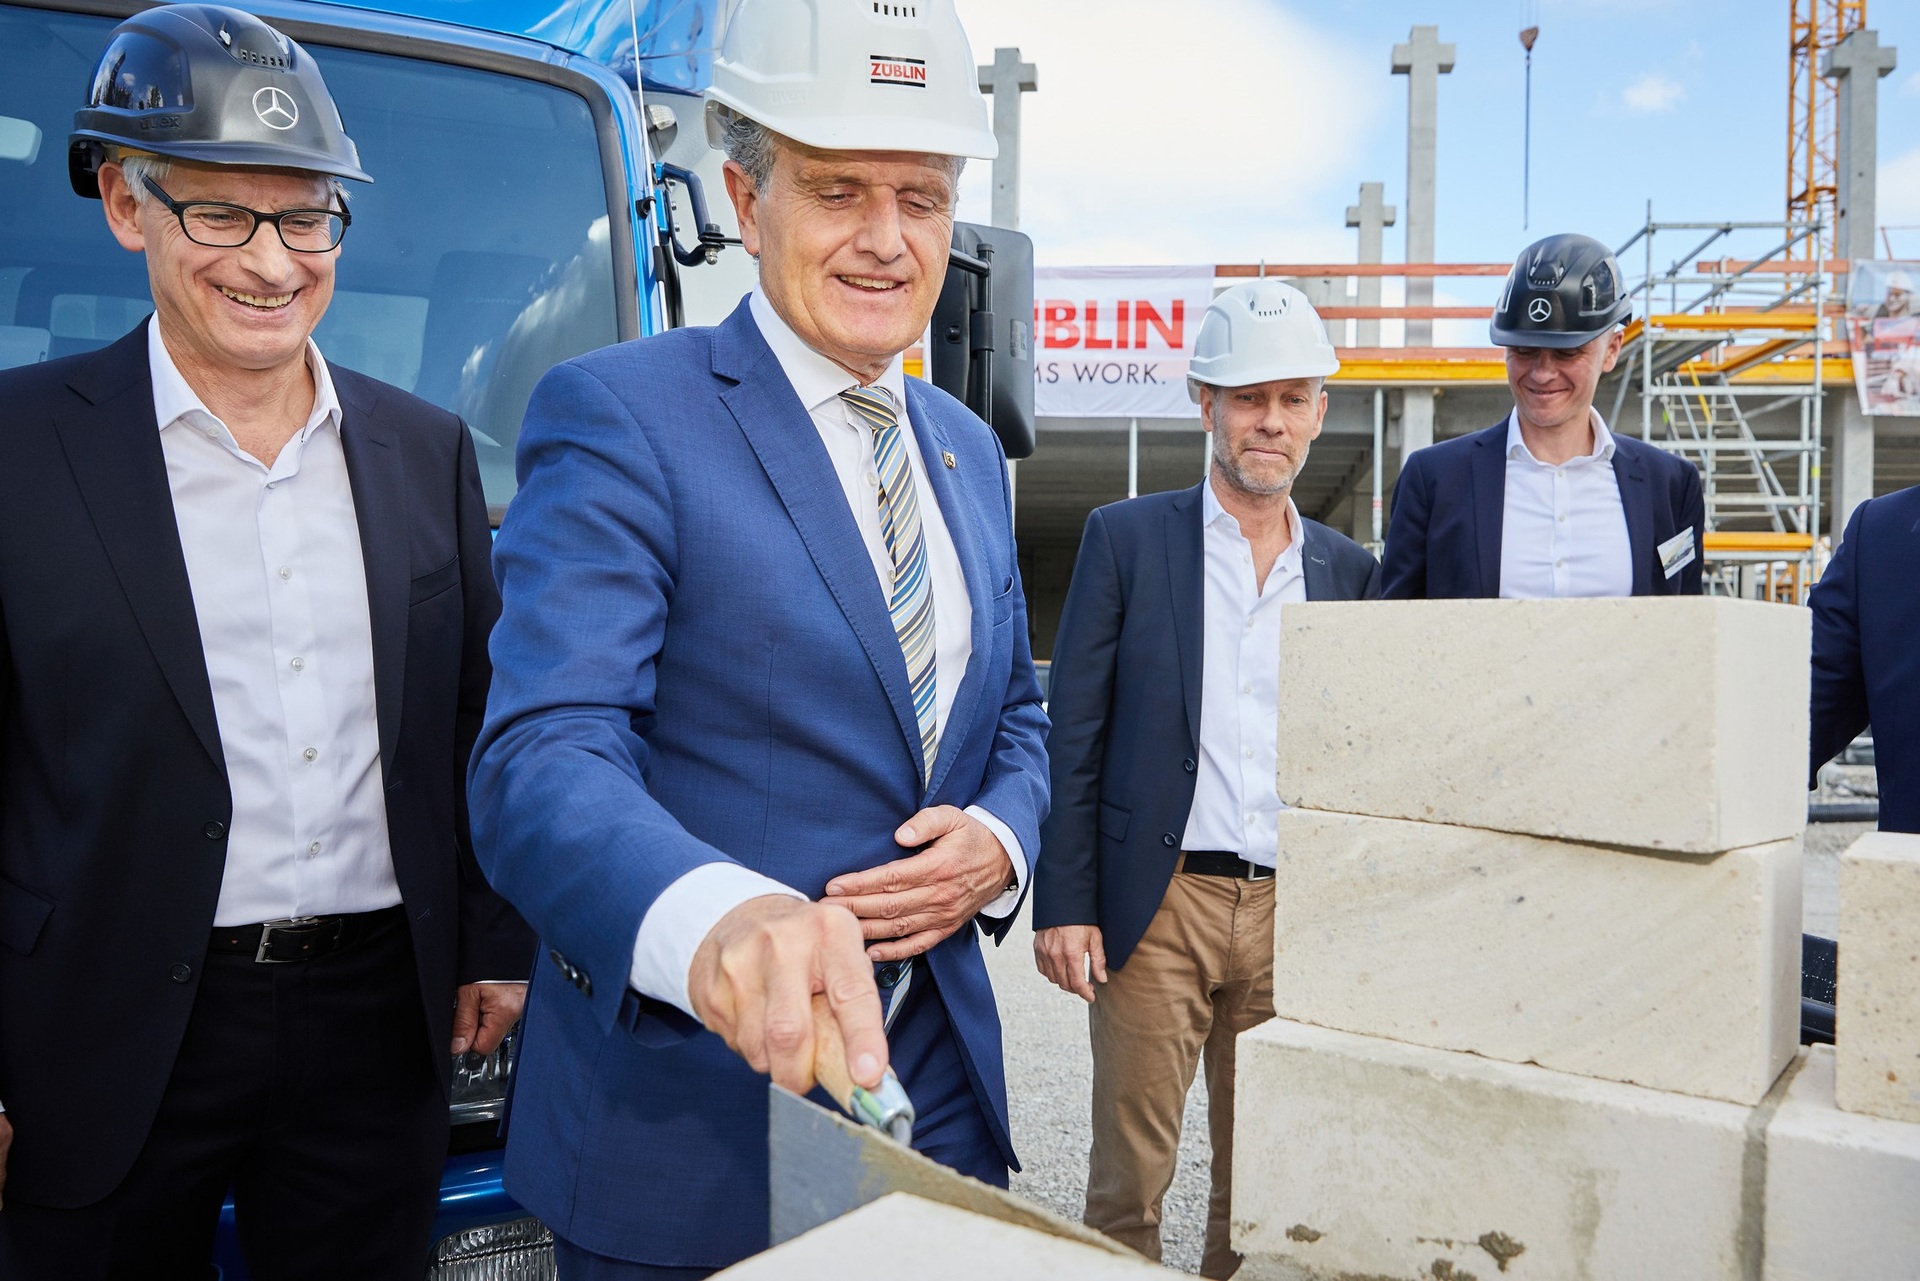 Groundbreaking ceremony: Daimler Truck establishes new location for sales and services of trucks and buses in Stuttgart